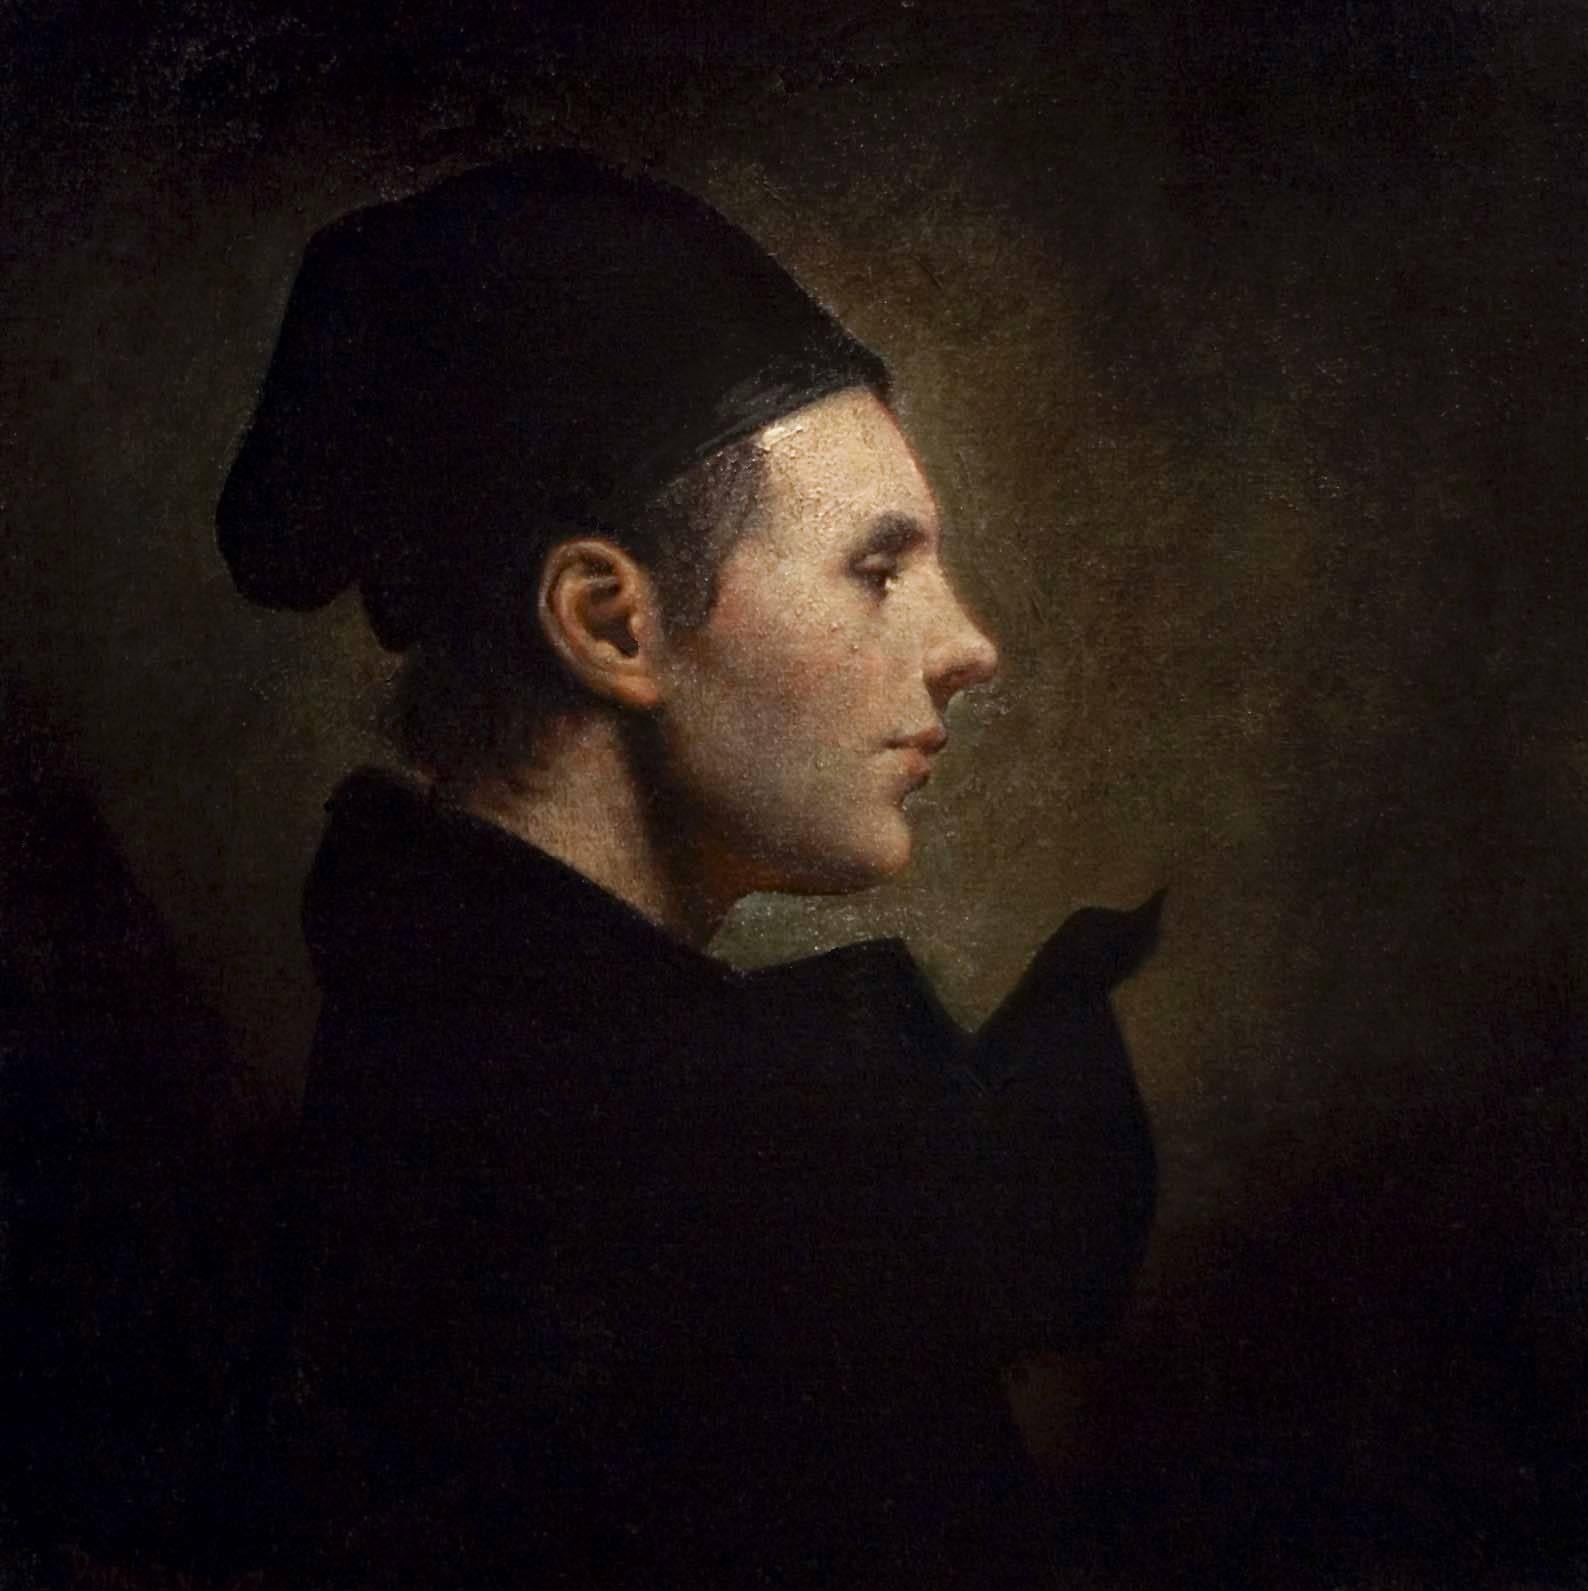 Ray Donley Portrait Painting - Cap 24, Portrait, Figurative, Baroque, Male, Oil, Painting, Timeless